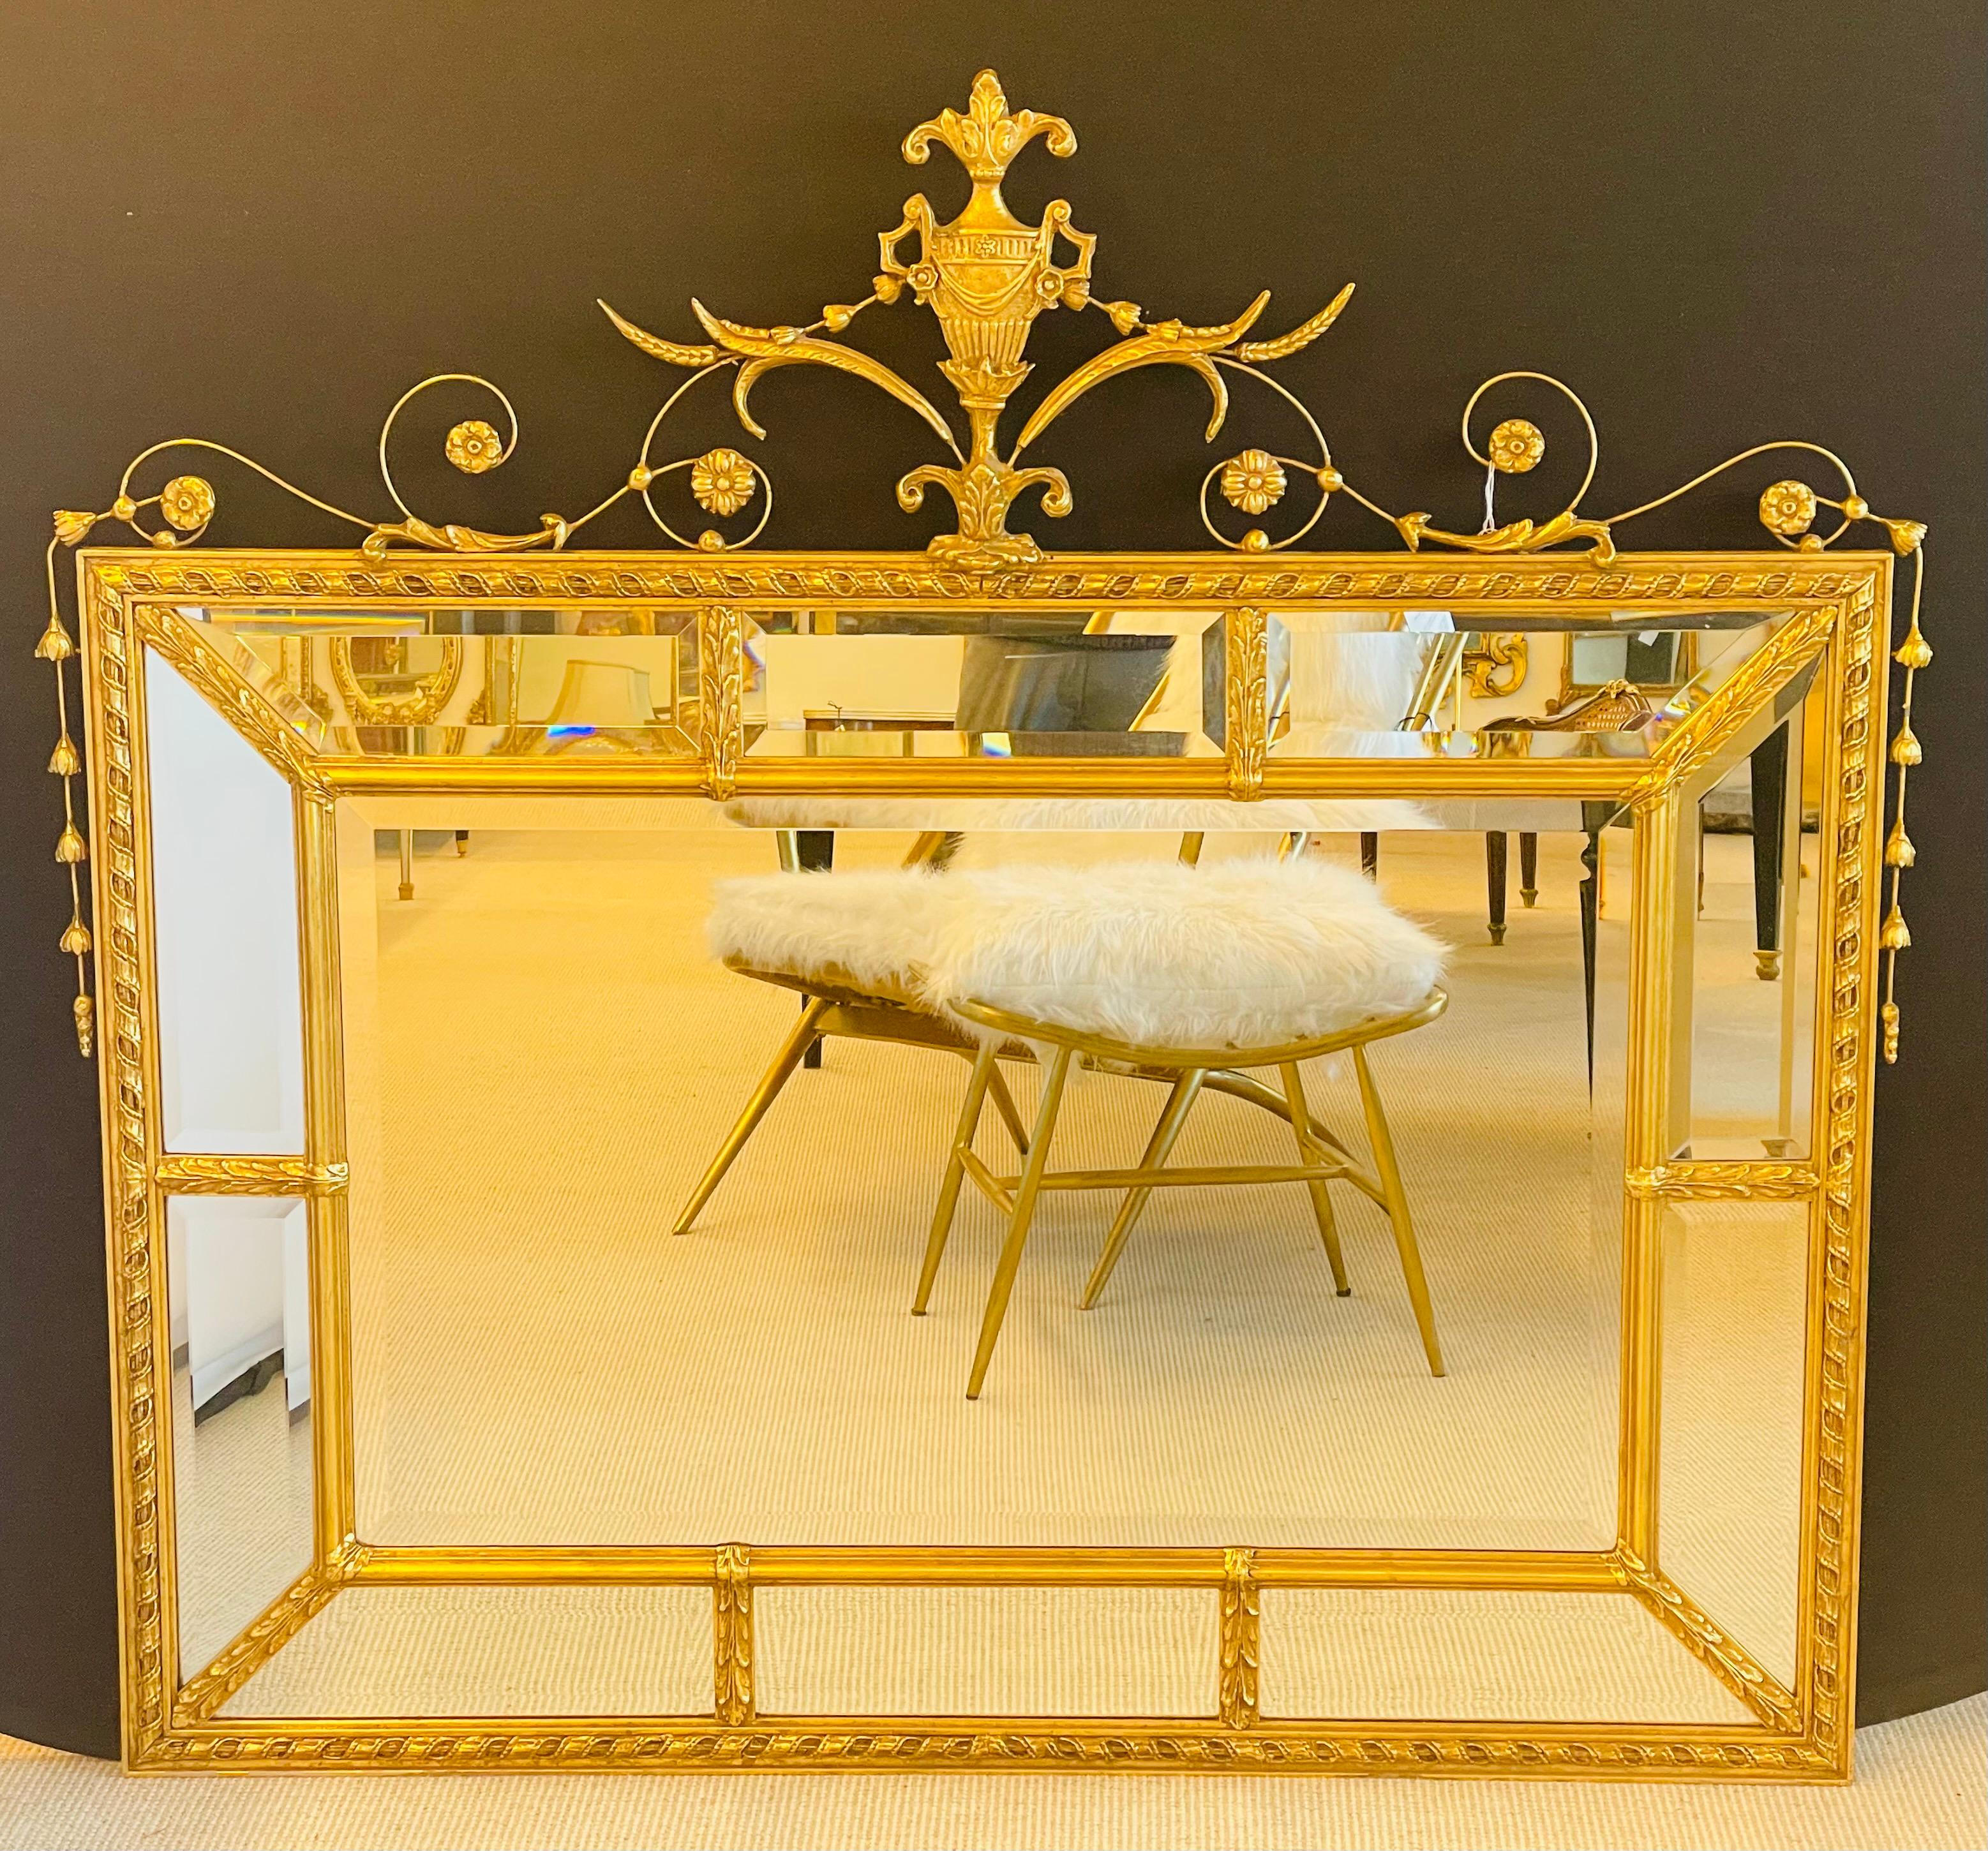 Adams style wall or console mirror. A finely carved wall or console, over the mantle mirror. The center beveled mirror flanked by a group of ten framed beveled mirrors set in gilt wood design. The top having an intricately pierced carved array of